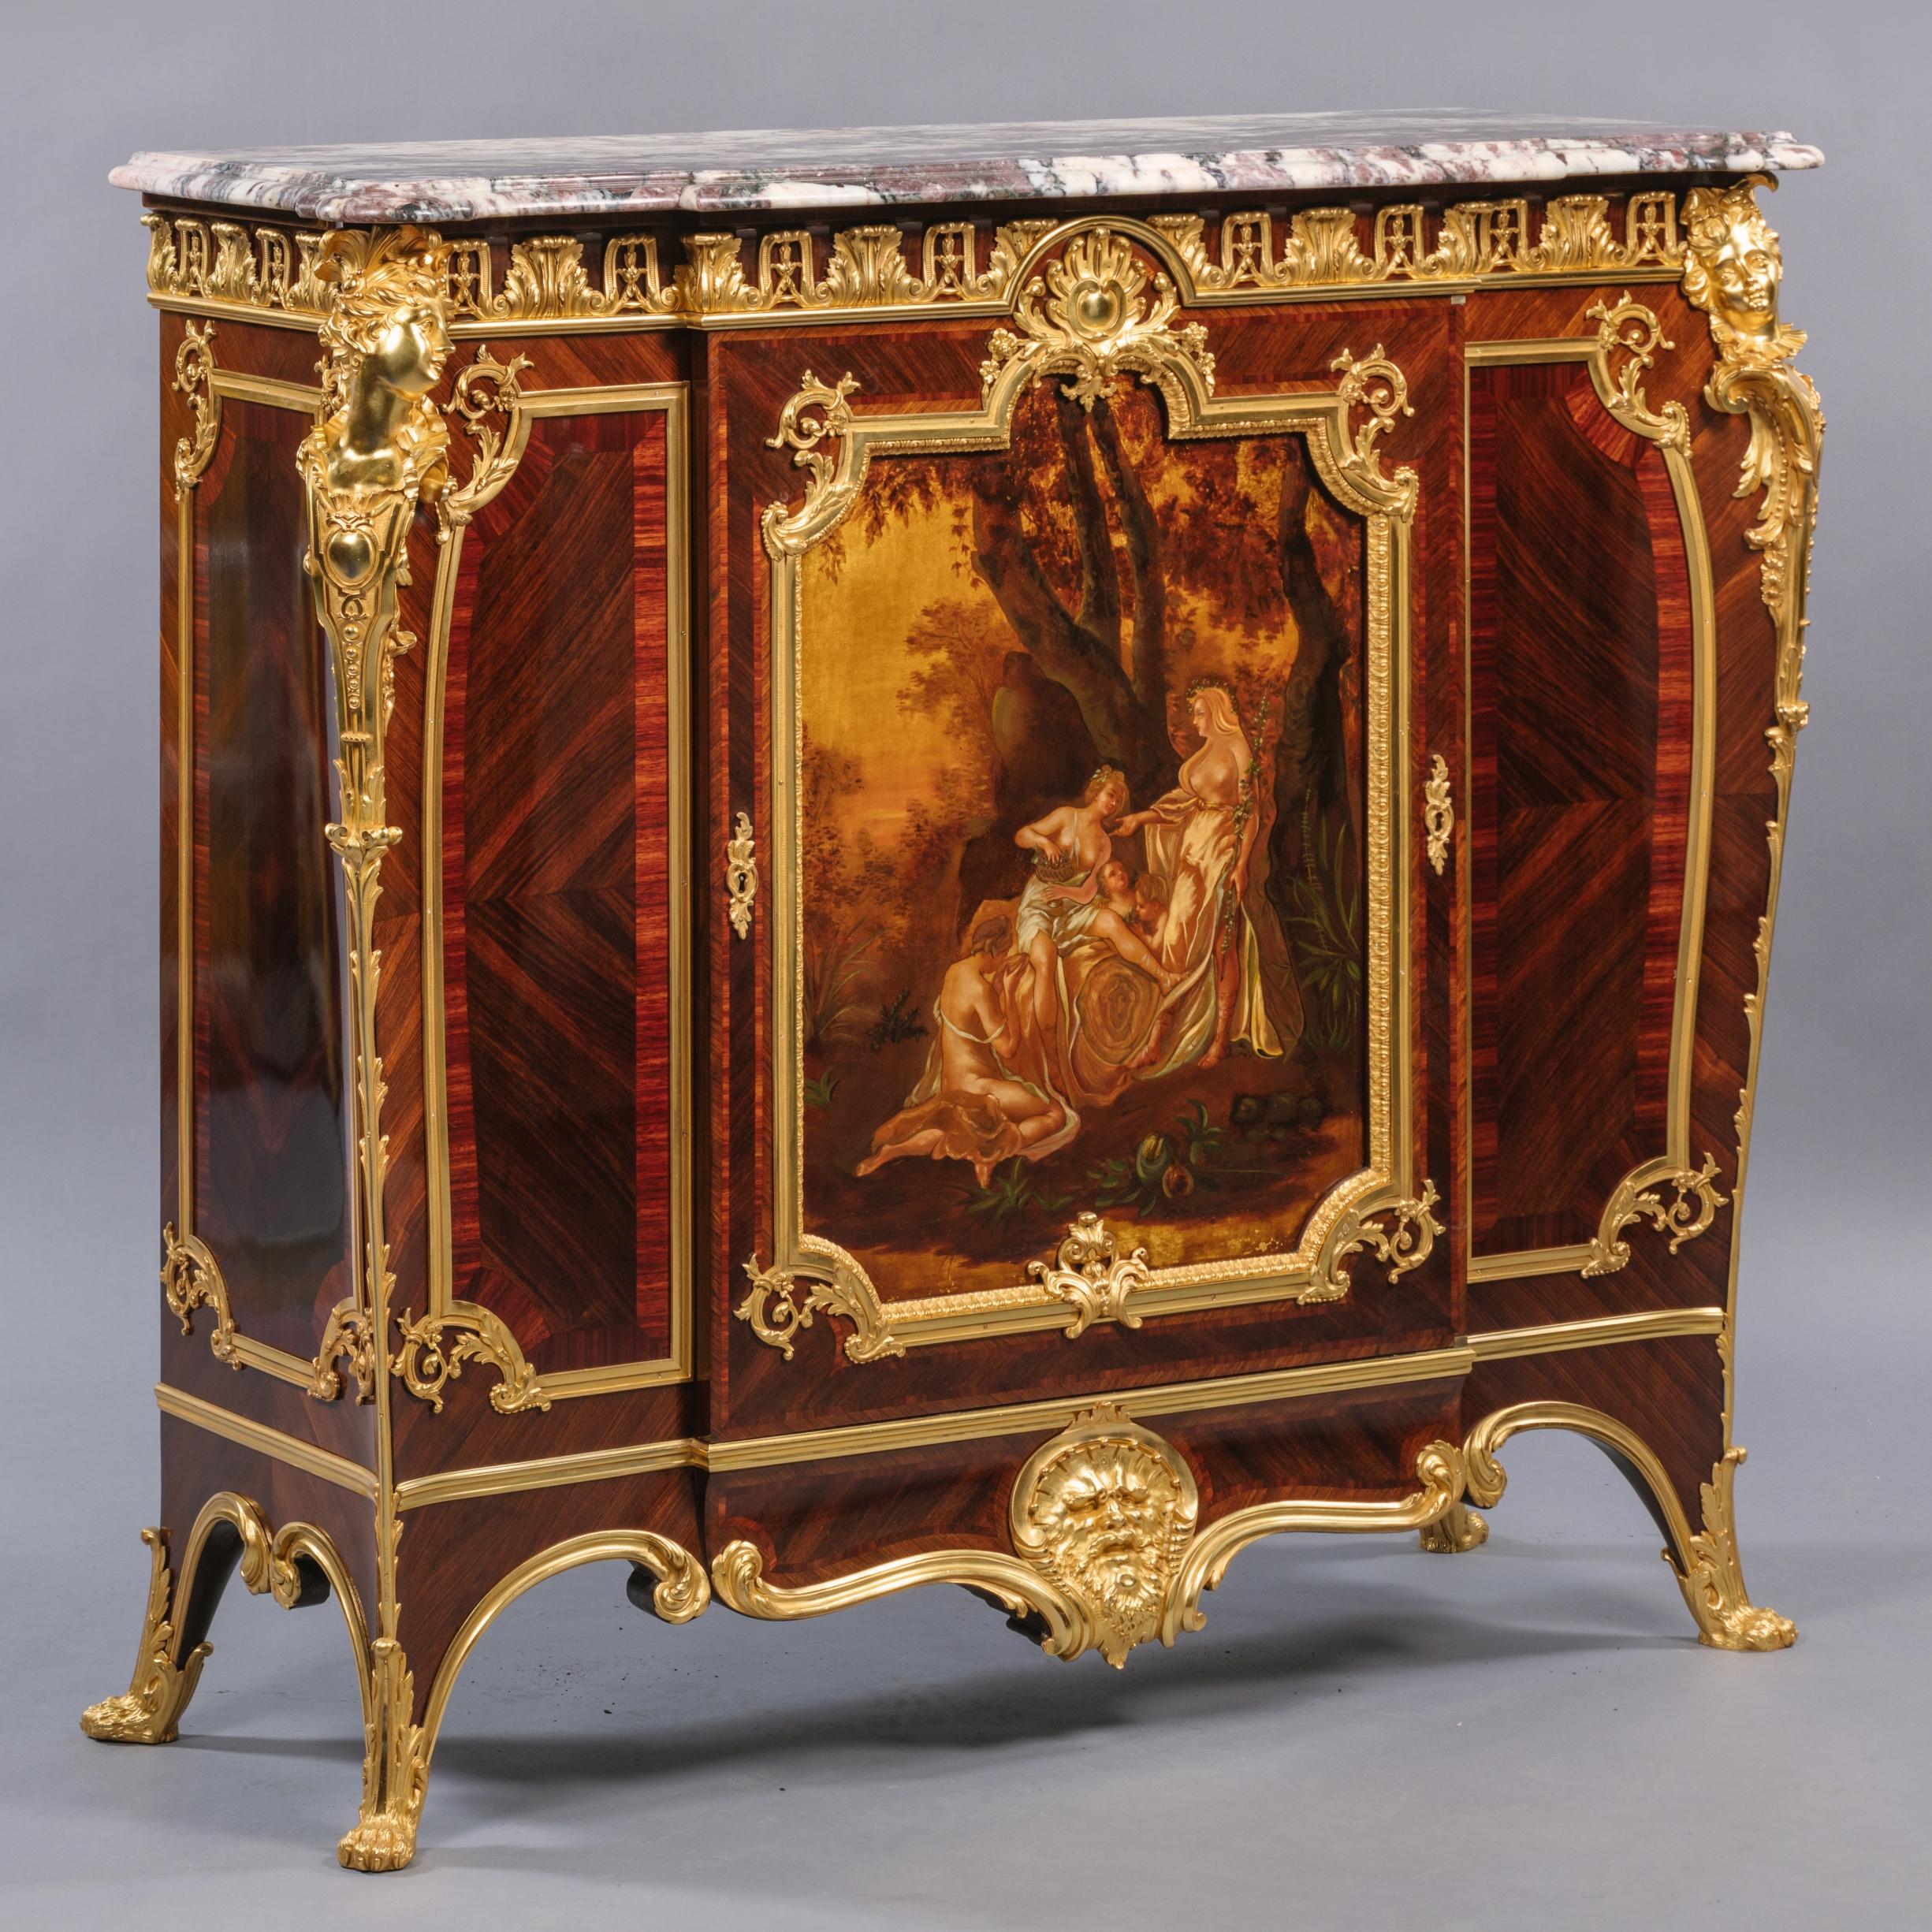 A fine Vernis Martin gilt-bronze mounted side cabinet with a marble top, by Joseph-Emmanuel Zwiener. 

Stamped to the carcass beneath the marble top 'E. ZWIENER'.

This model of cabinet or ‘meuble à hauteur d'appui’ by Zwiener is illustrated in